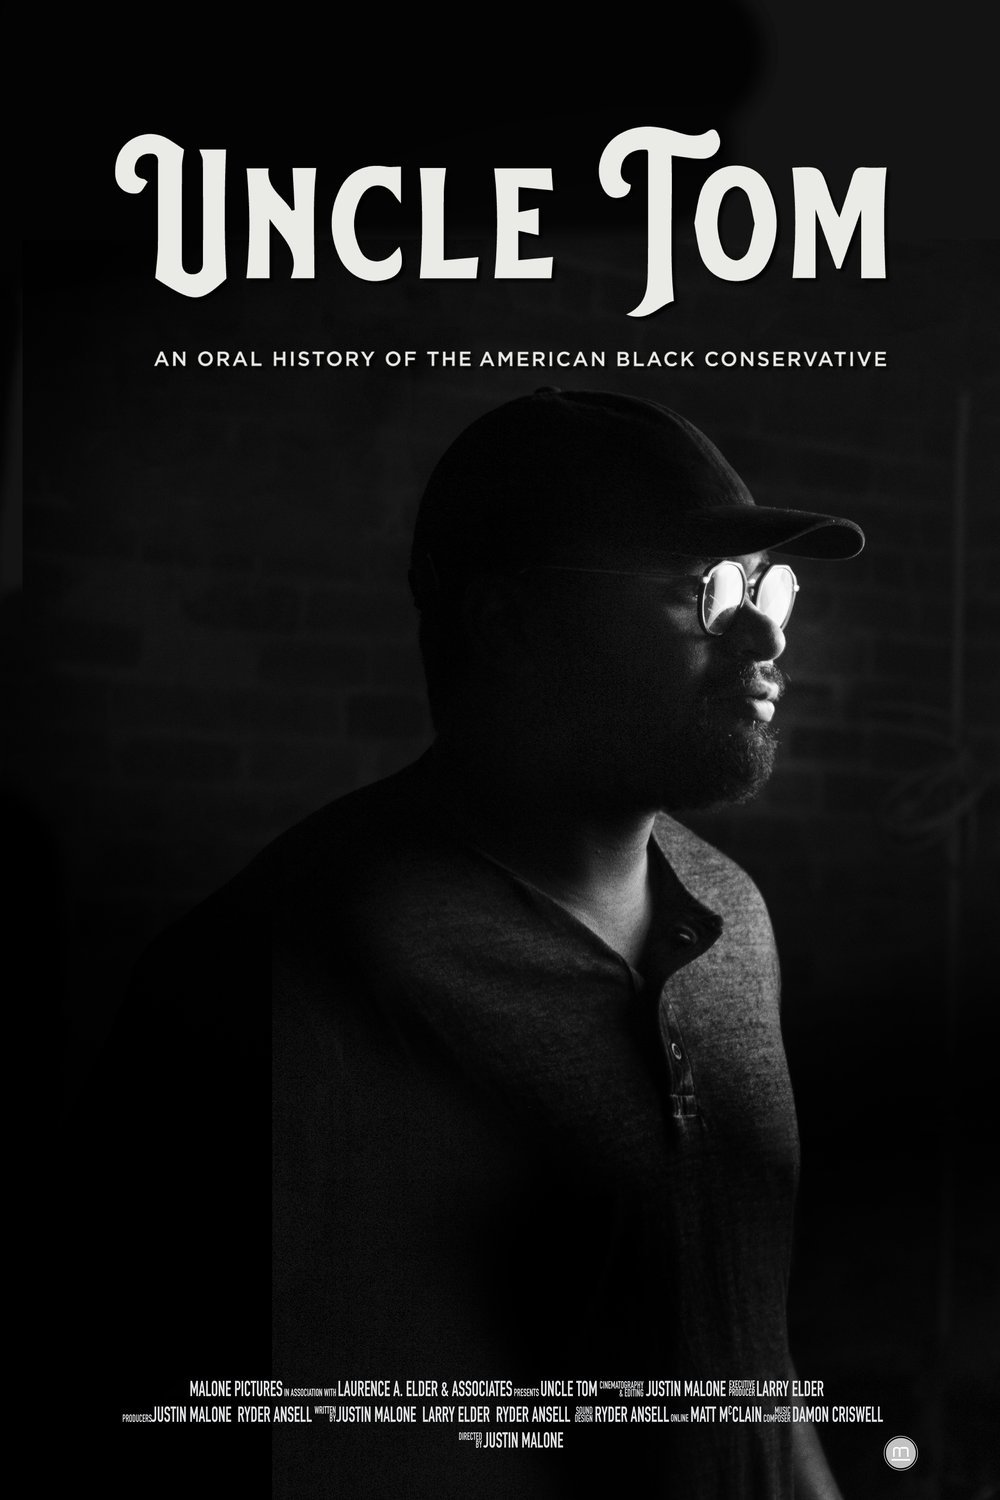 Poster of the movie Uncle Tom